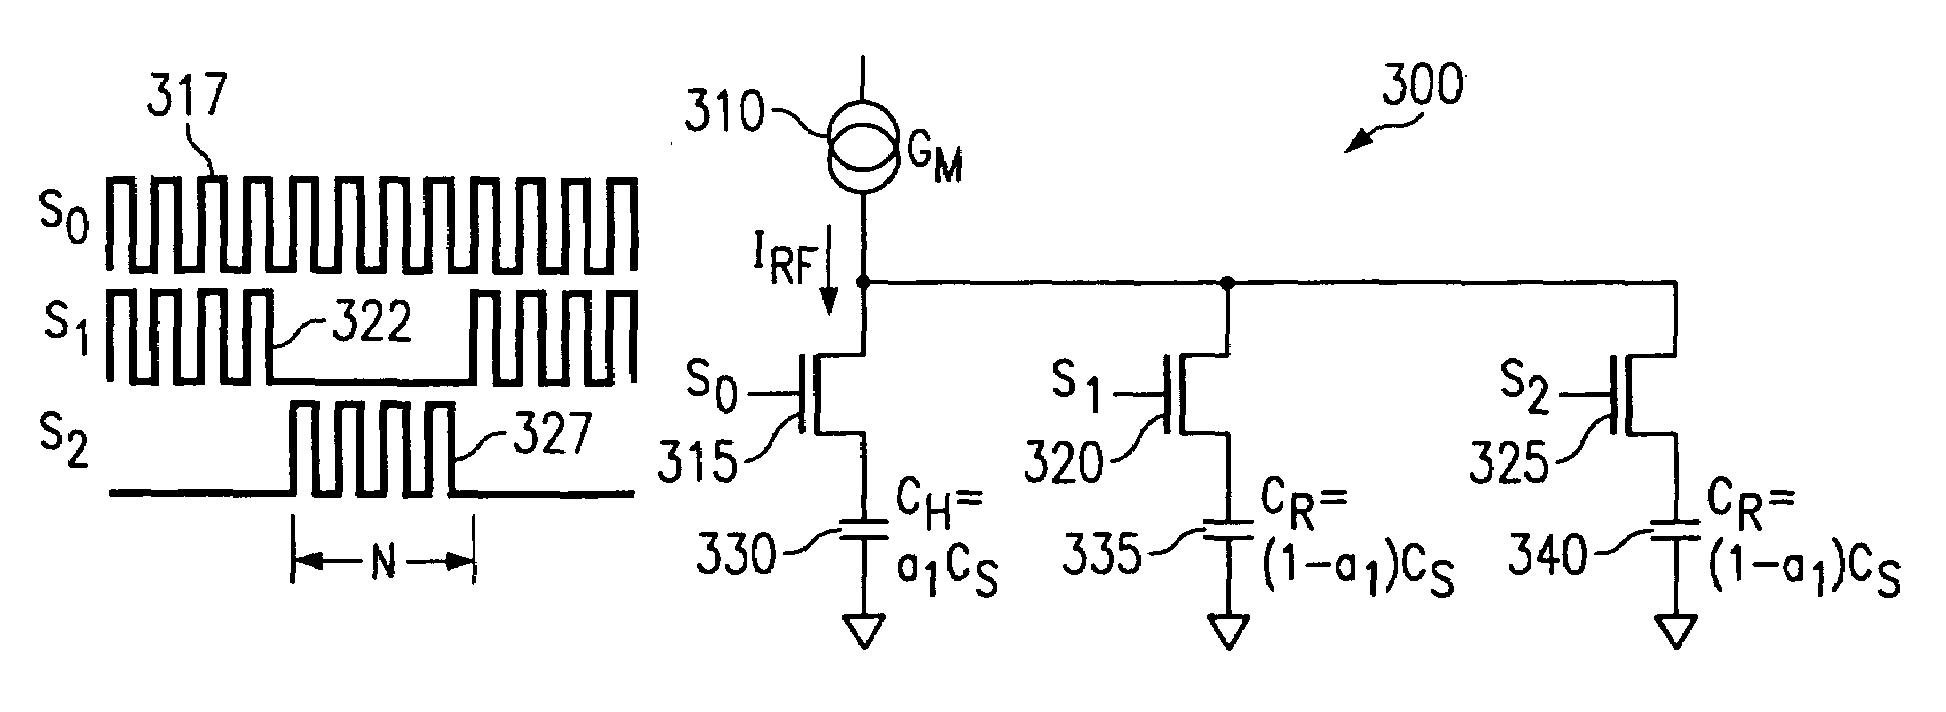 Efficient charge transfer using a switched capacitor resistor